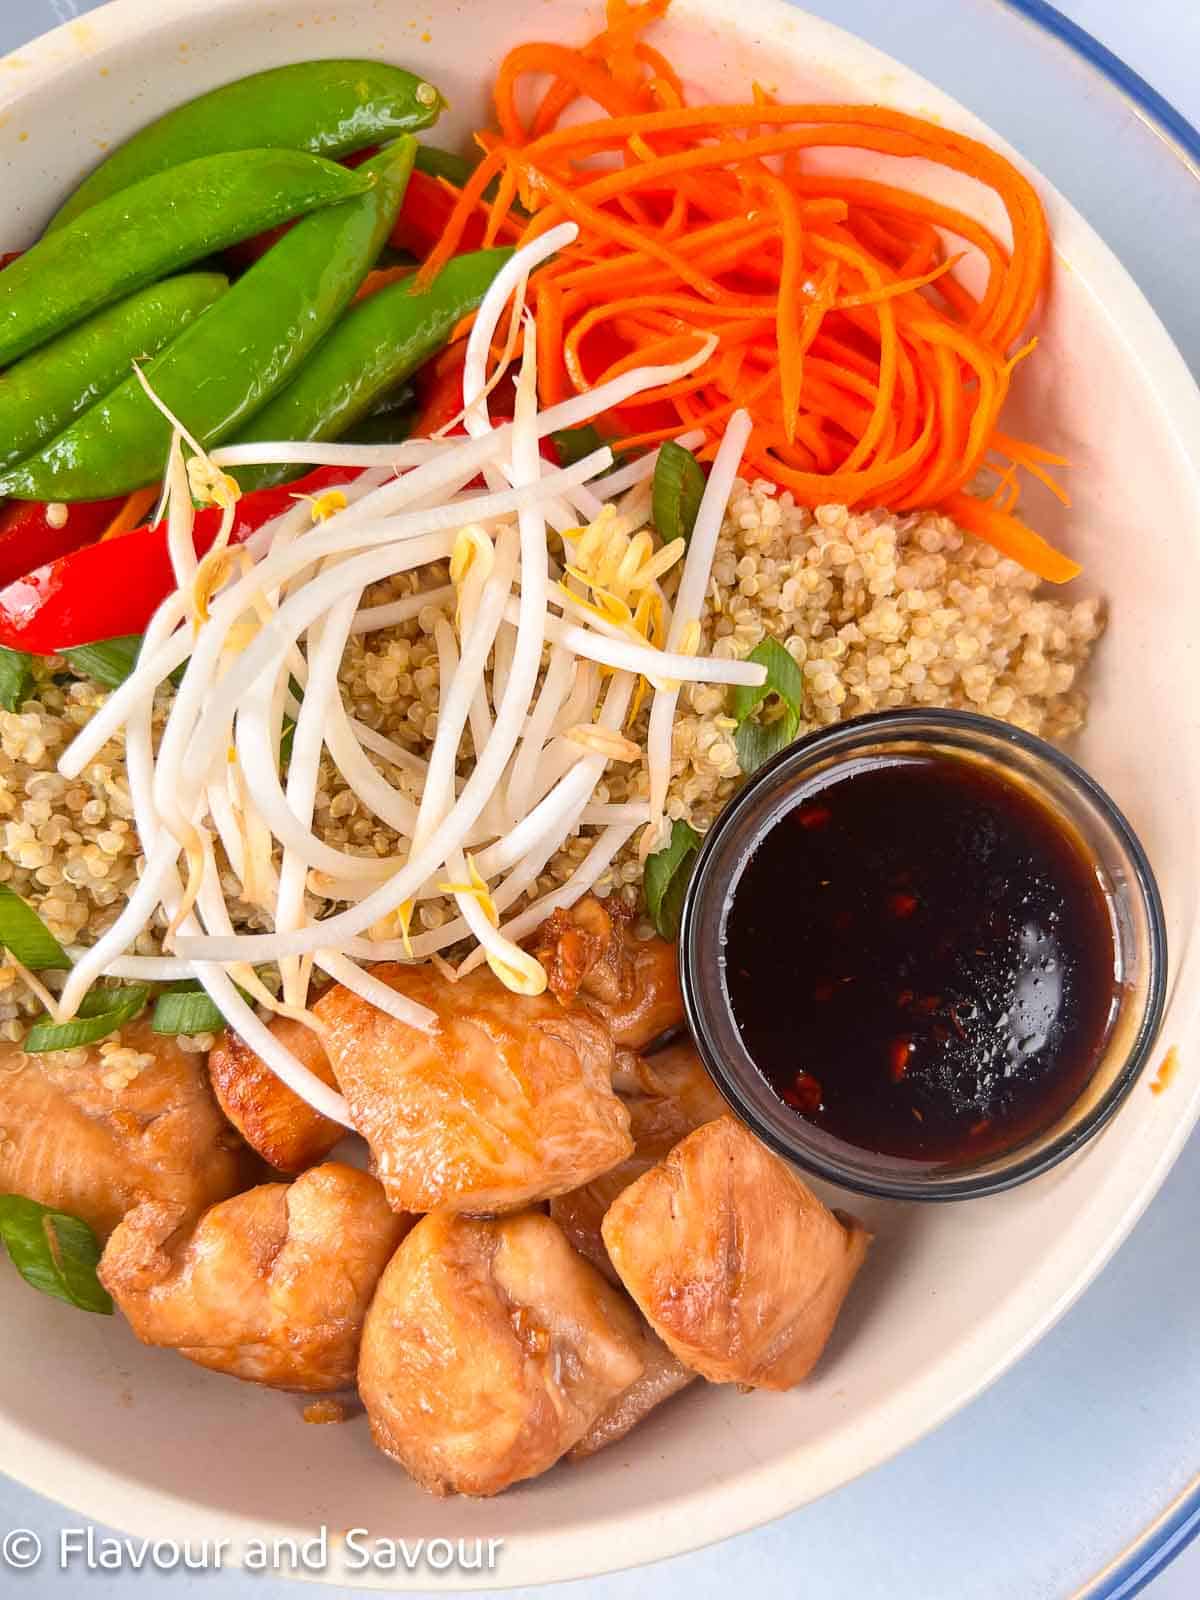 Teriyaki chicken cubes, quinoa and vegetables in a bowl with a small container of teriyaki sauce.